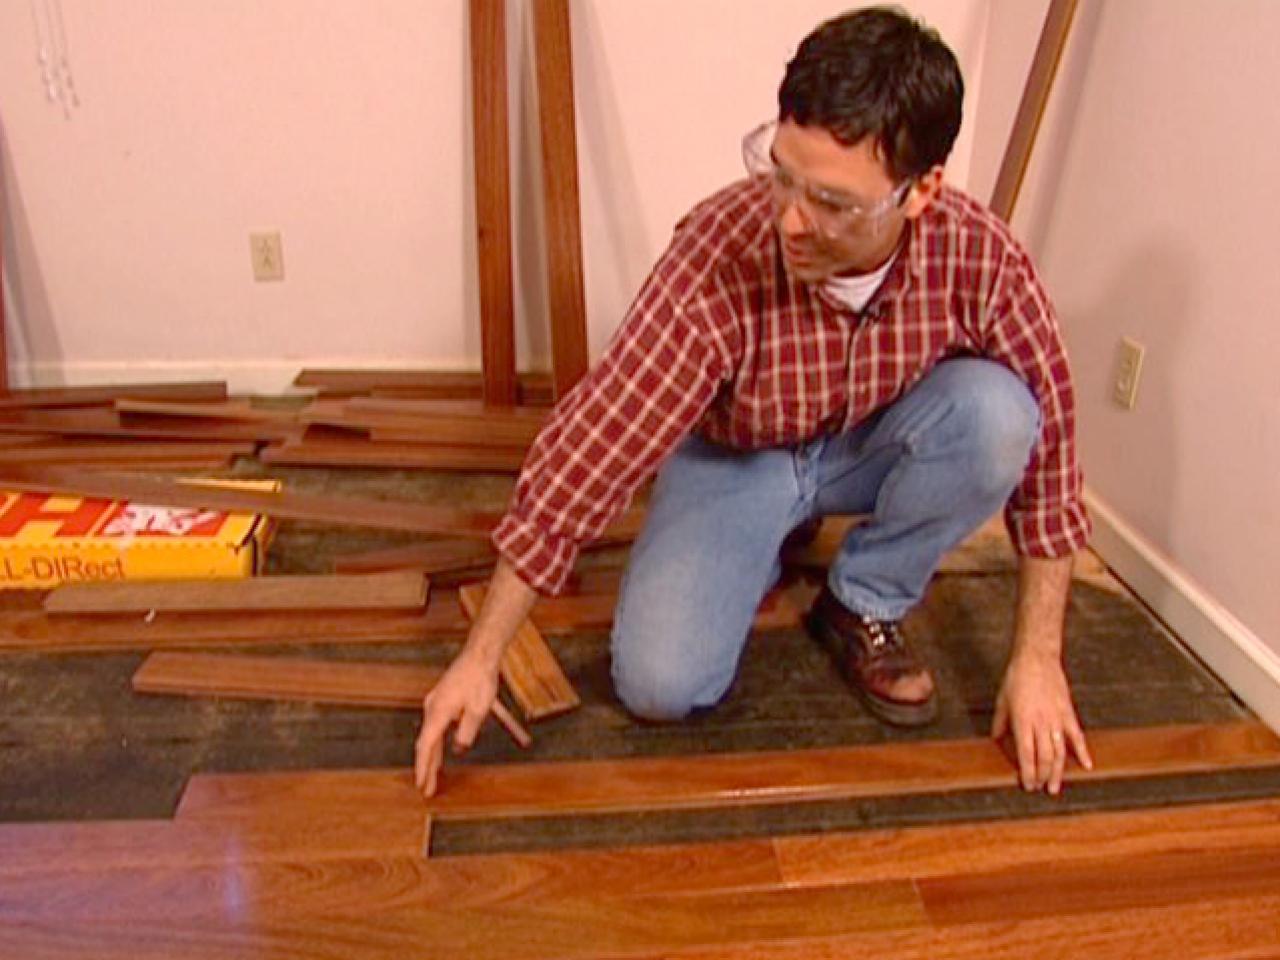 How To Install A Hardwood Floor, How Much Does It Cost To Install Hardwood Floors Yourself